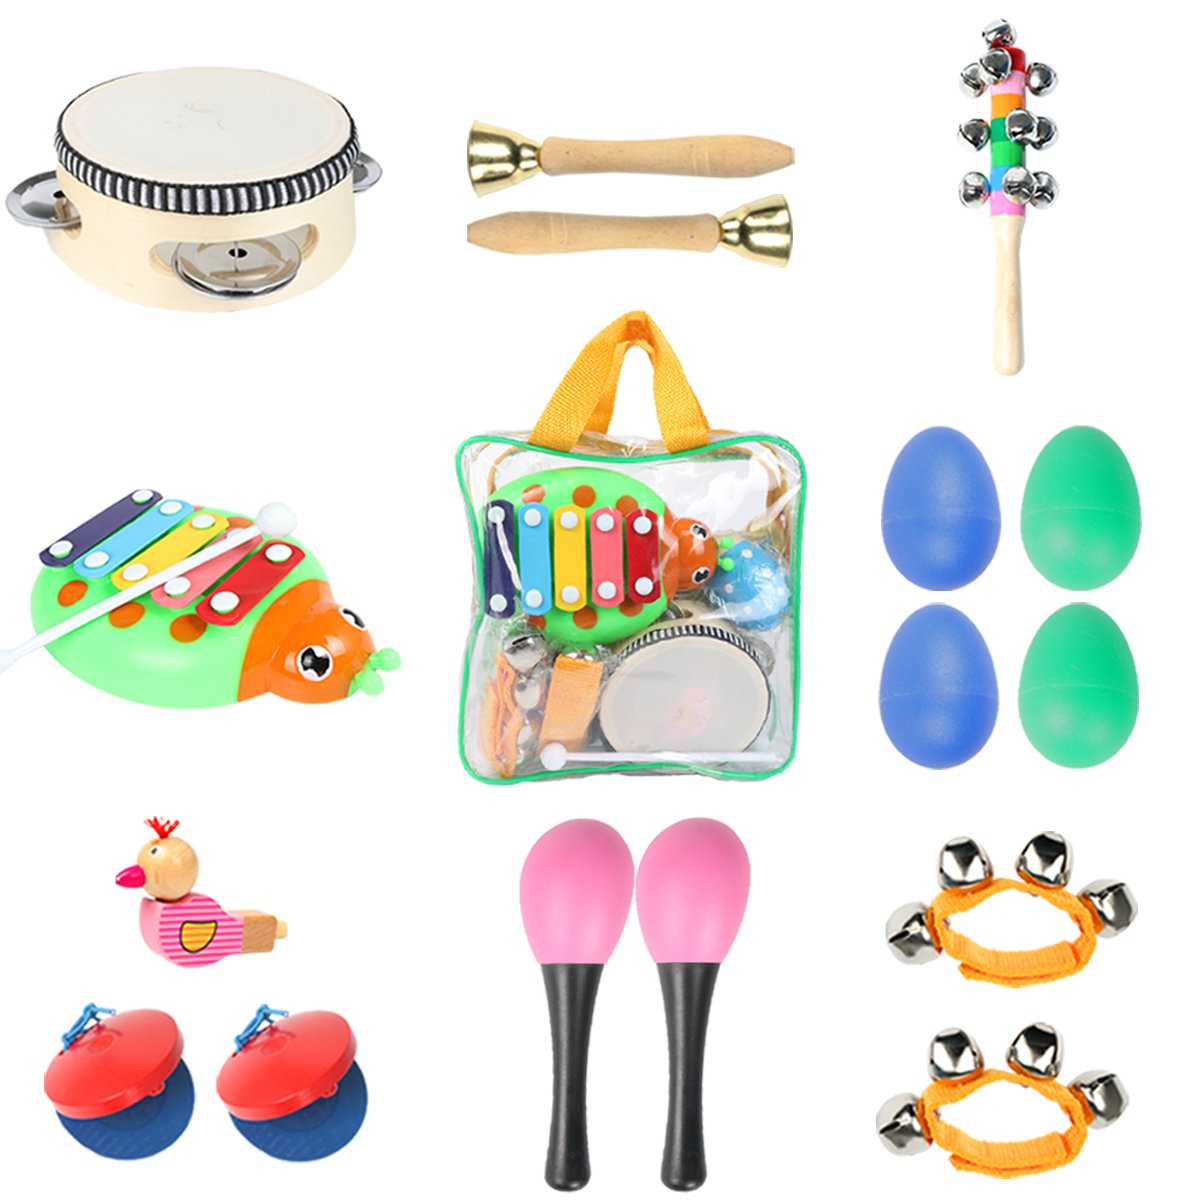 Toddler Toys Musical Instruments - Ehome 9 types 16pcs Percussion Toy Set for Kids 